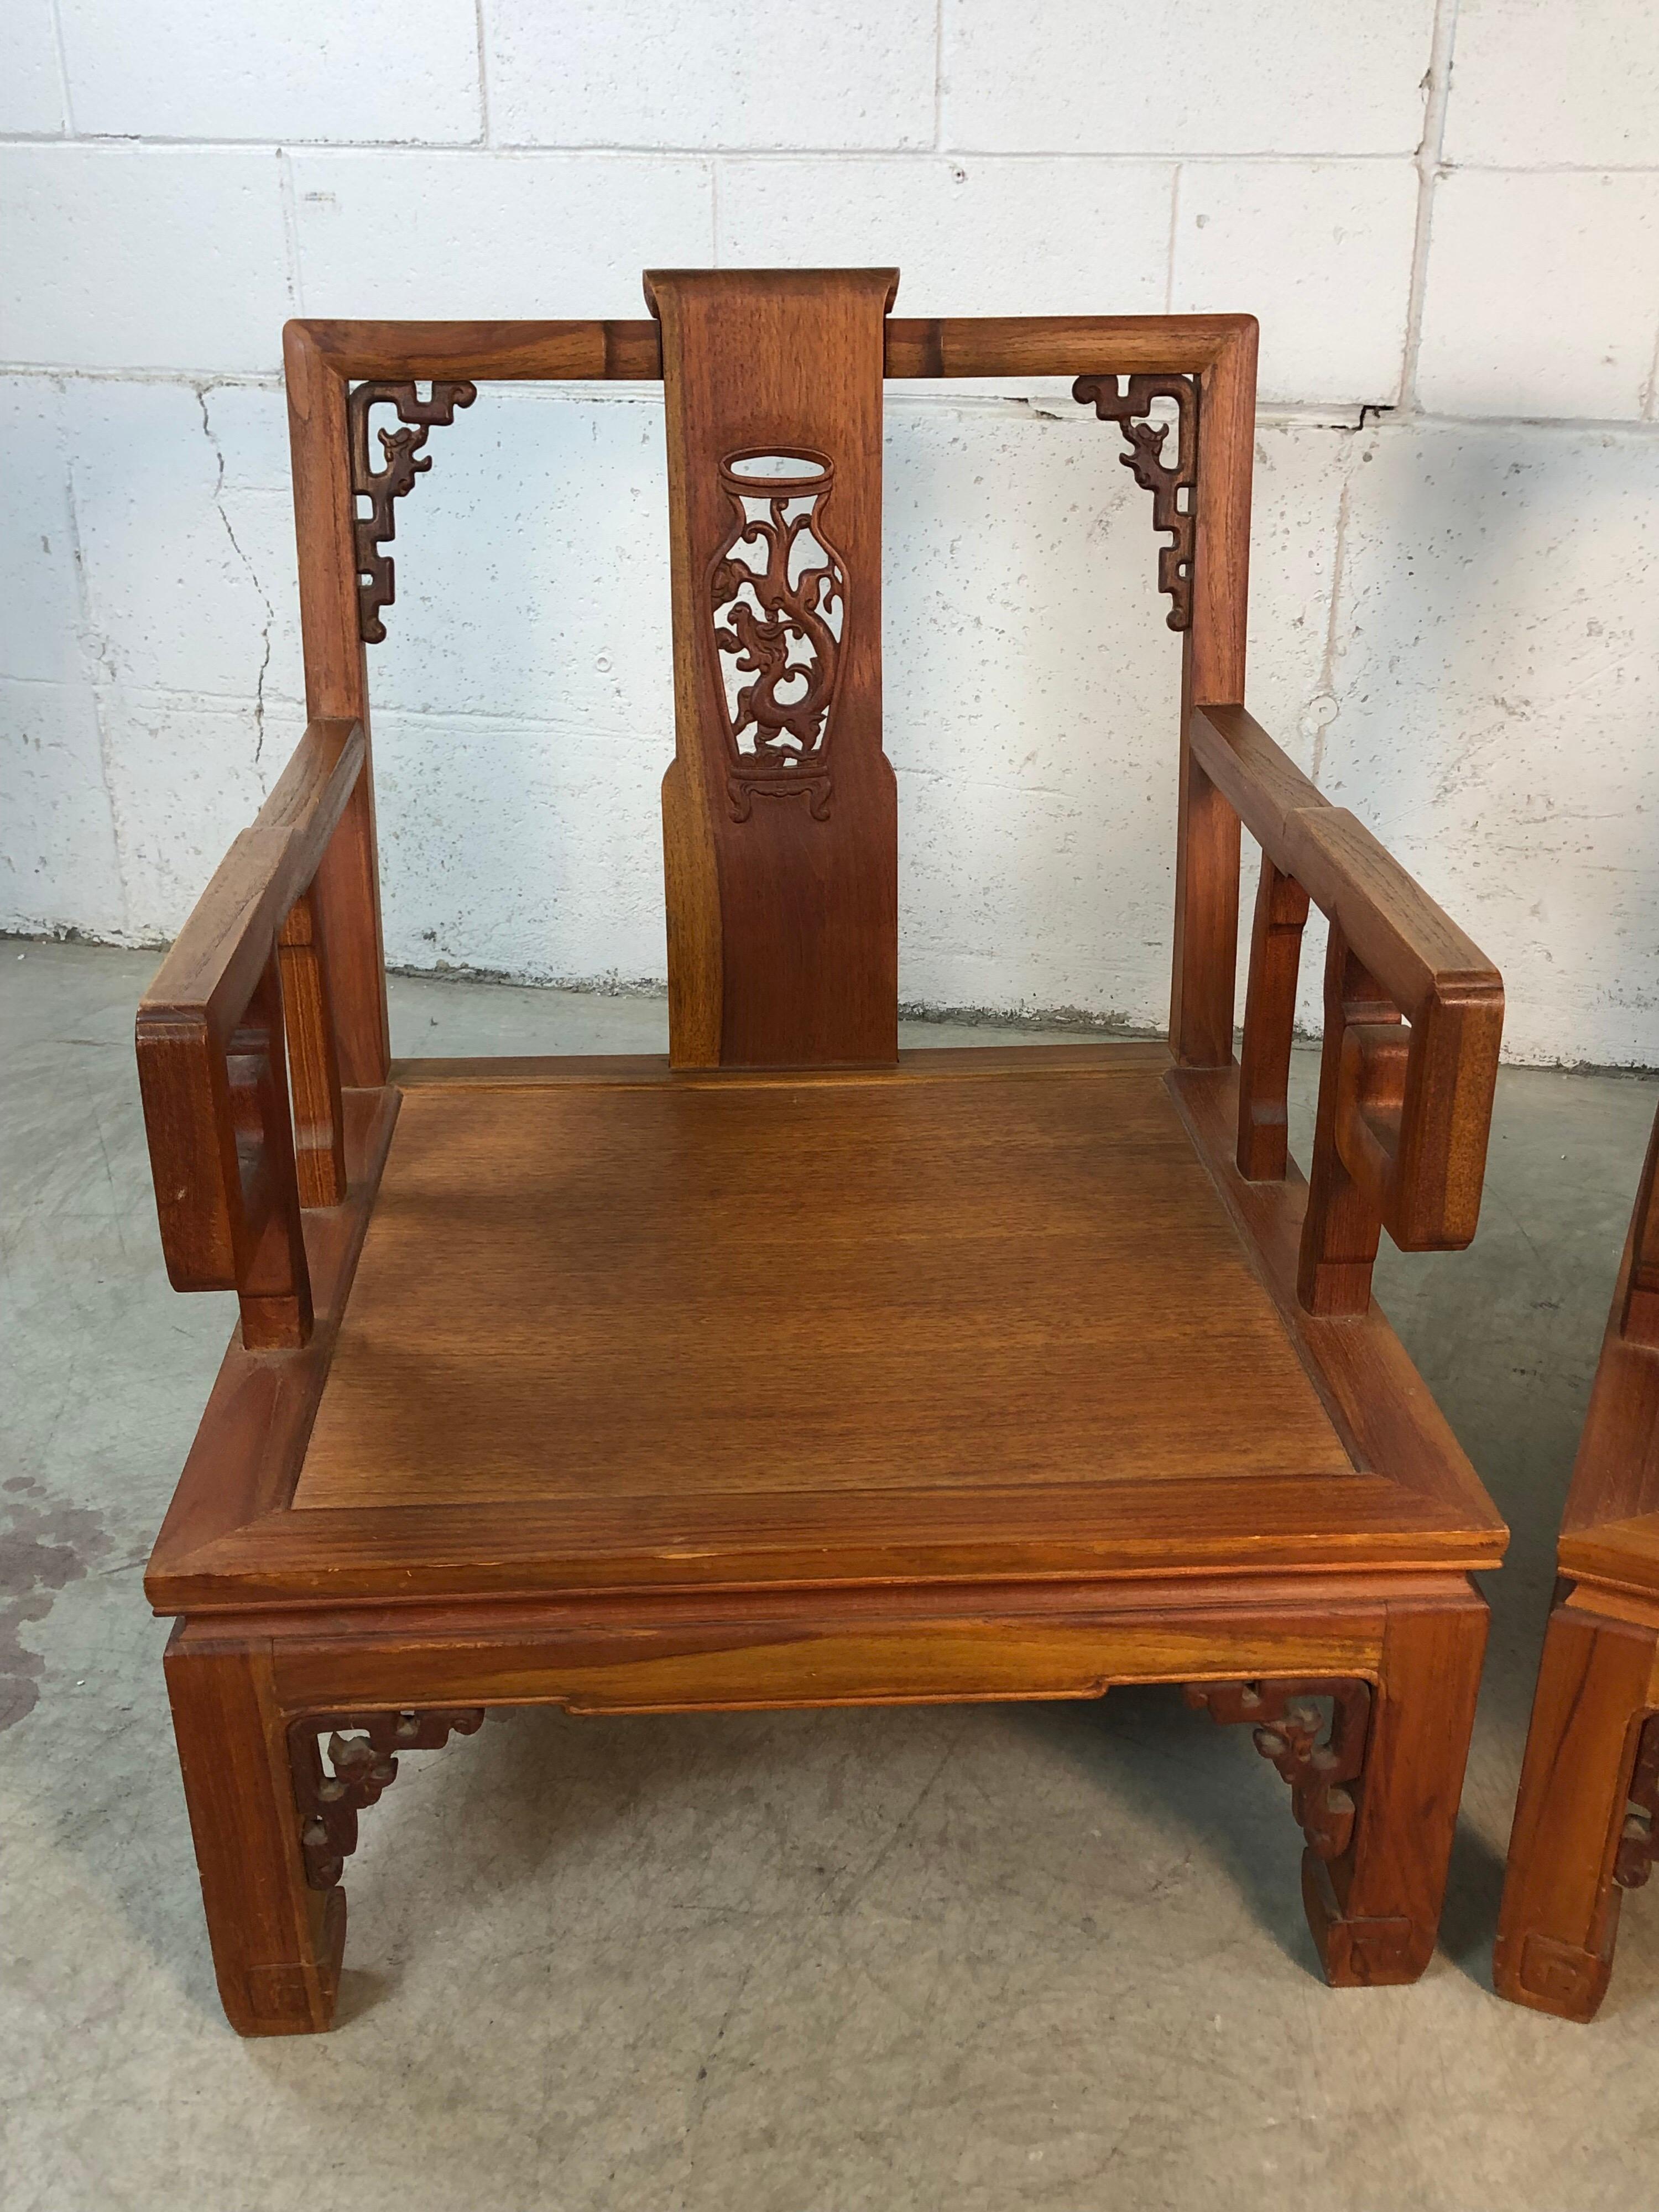 Vintage pair of Asian Ming style low hand carved wood armchairs. The chairs have dragon carved accents and are sturdy heavy solid wood chairs. The dragon accents run along the backs and skirts of the chairs. The chairs will come with the original